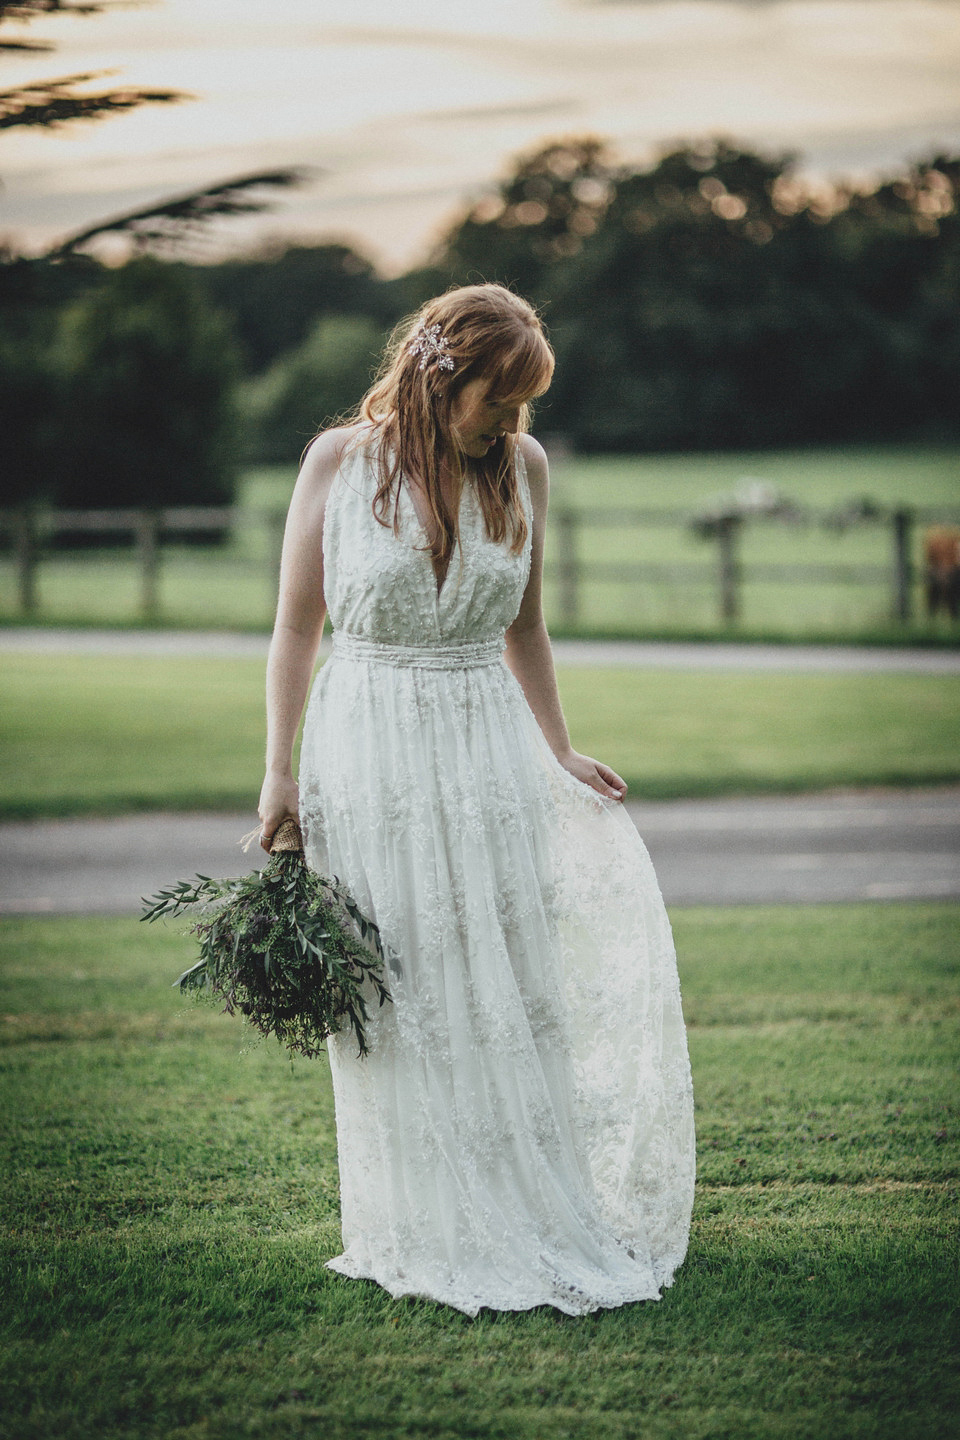 Bride Jess made her wedding dress herself. She tied the knot with Jordan in a woodland inspired wedding. Photography by Ali Paul.